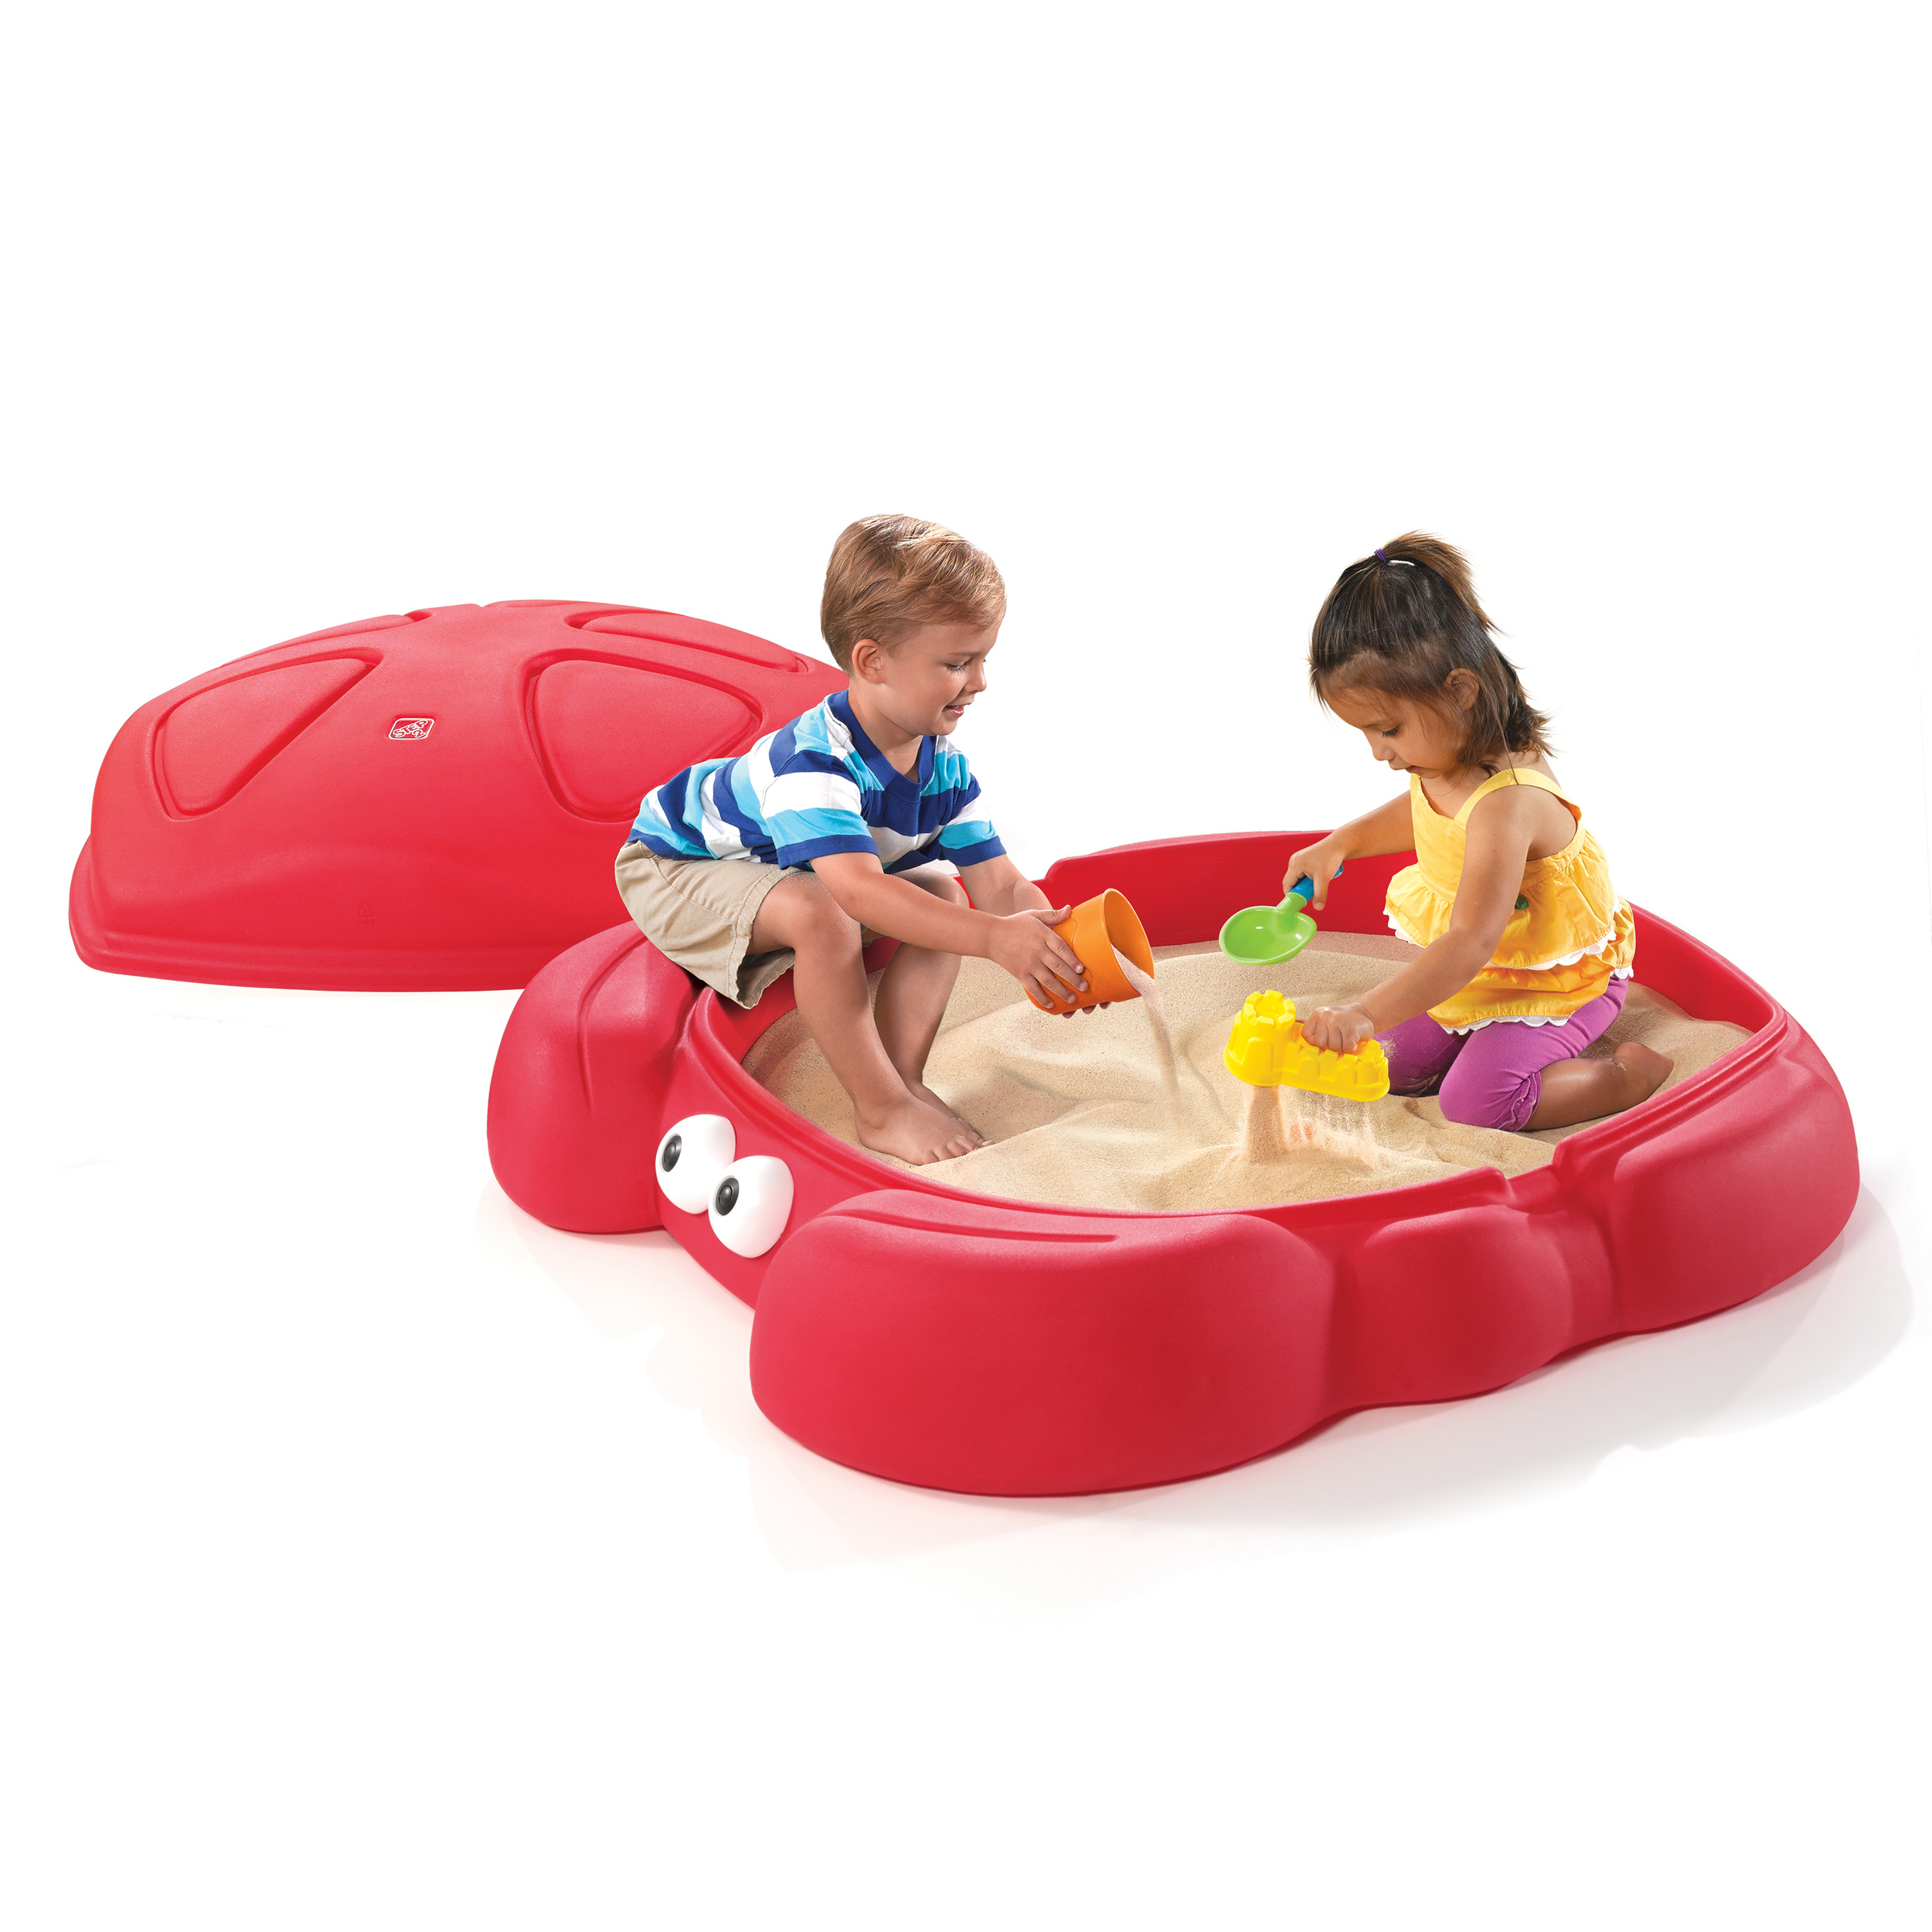 Step2 Crabbie Sandbox Red Plastic Outdoor Sandbox with Cover for Kids - image 1 of 6